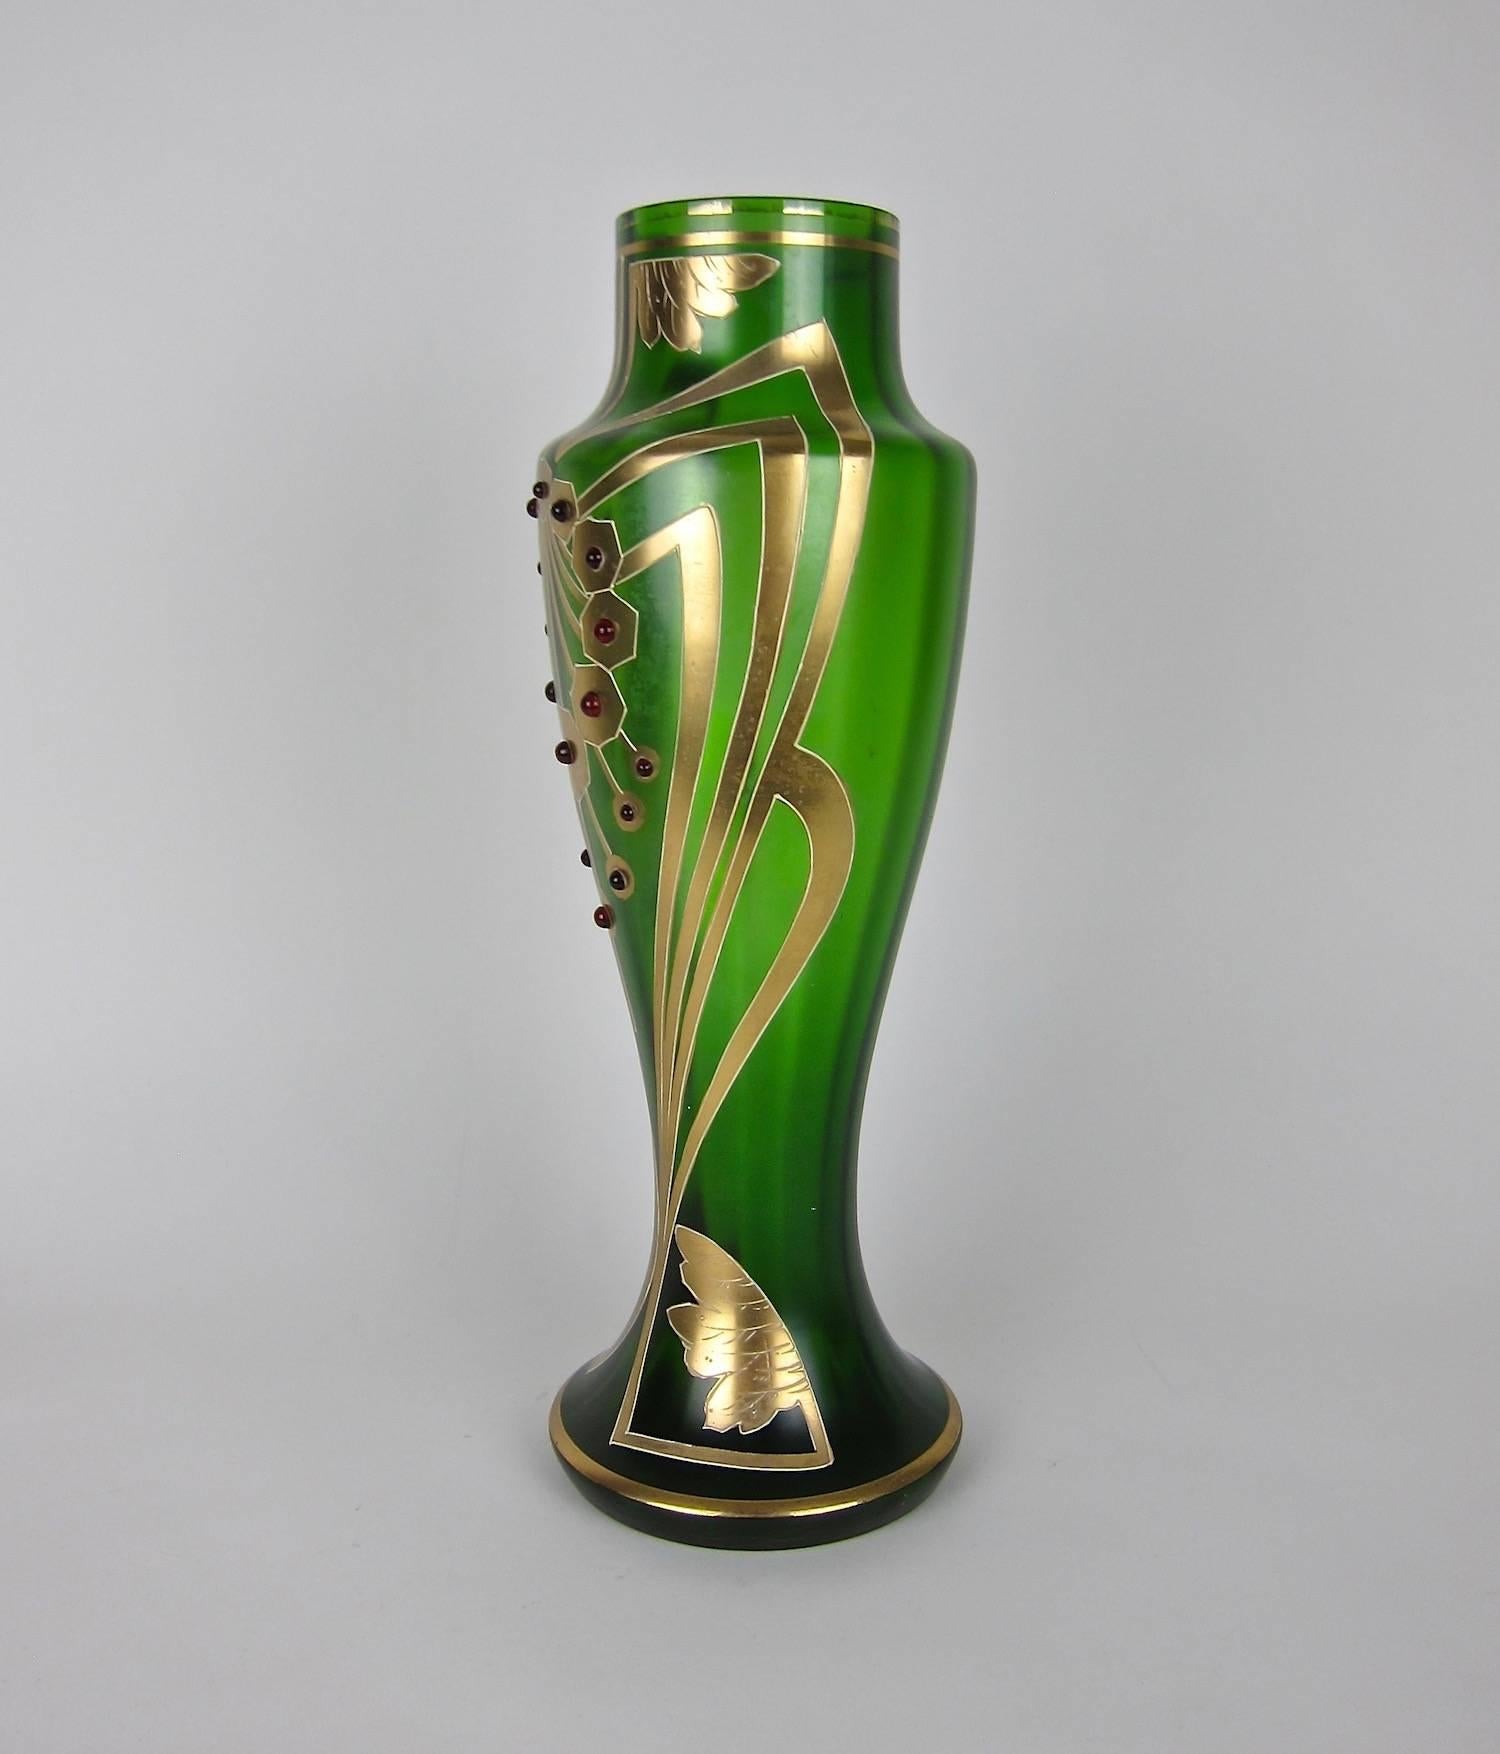 A tall and striking Bohemian art glass vase, dating circa 1900-1905. The ribbed, green glass vessel was mould-blown and includes a starburst pattern on the base. The hand painted gold work decoration features an Art Nouveau / Jugendstil whiplash